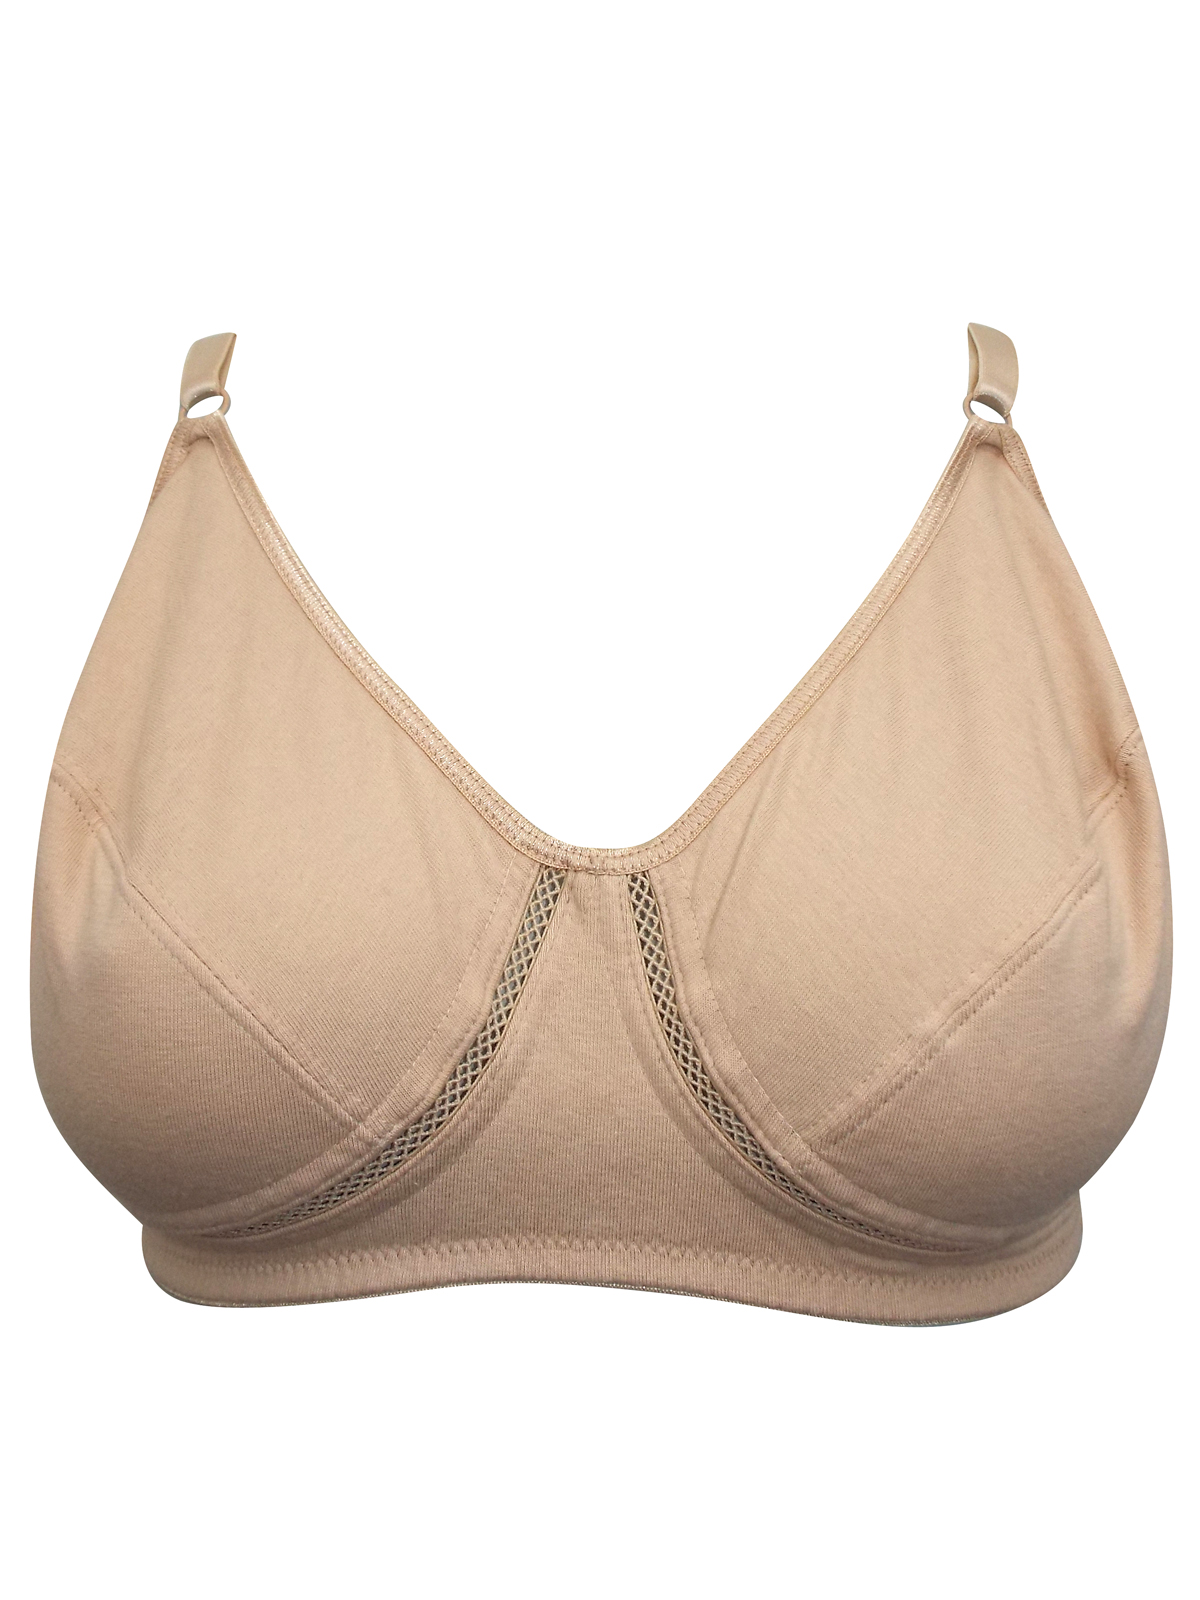 ASSORTED Full Cup Bras - Size 34 to 40 (B-C-D)